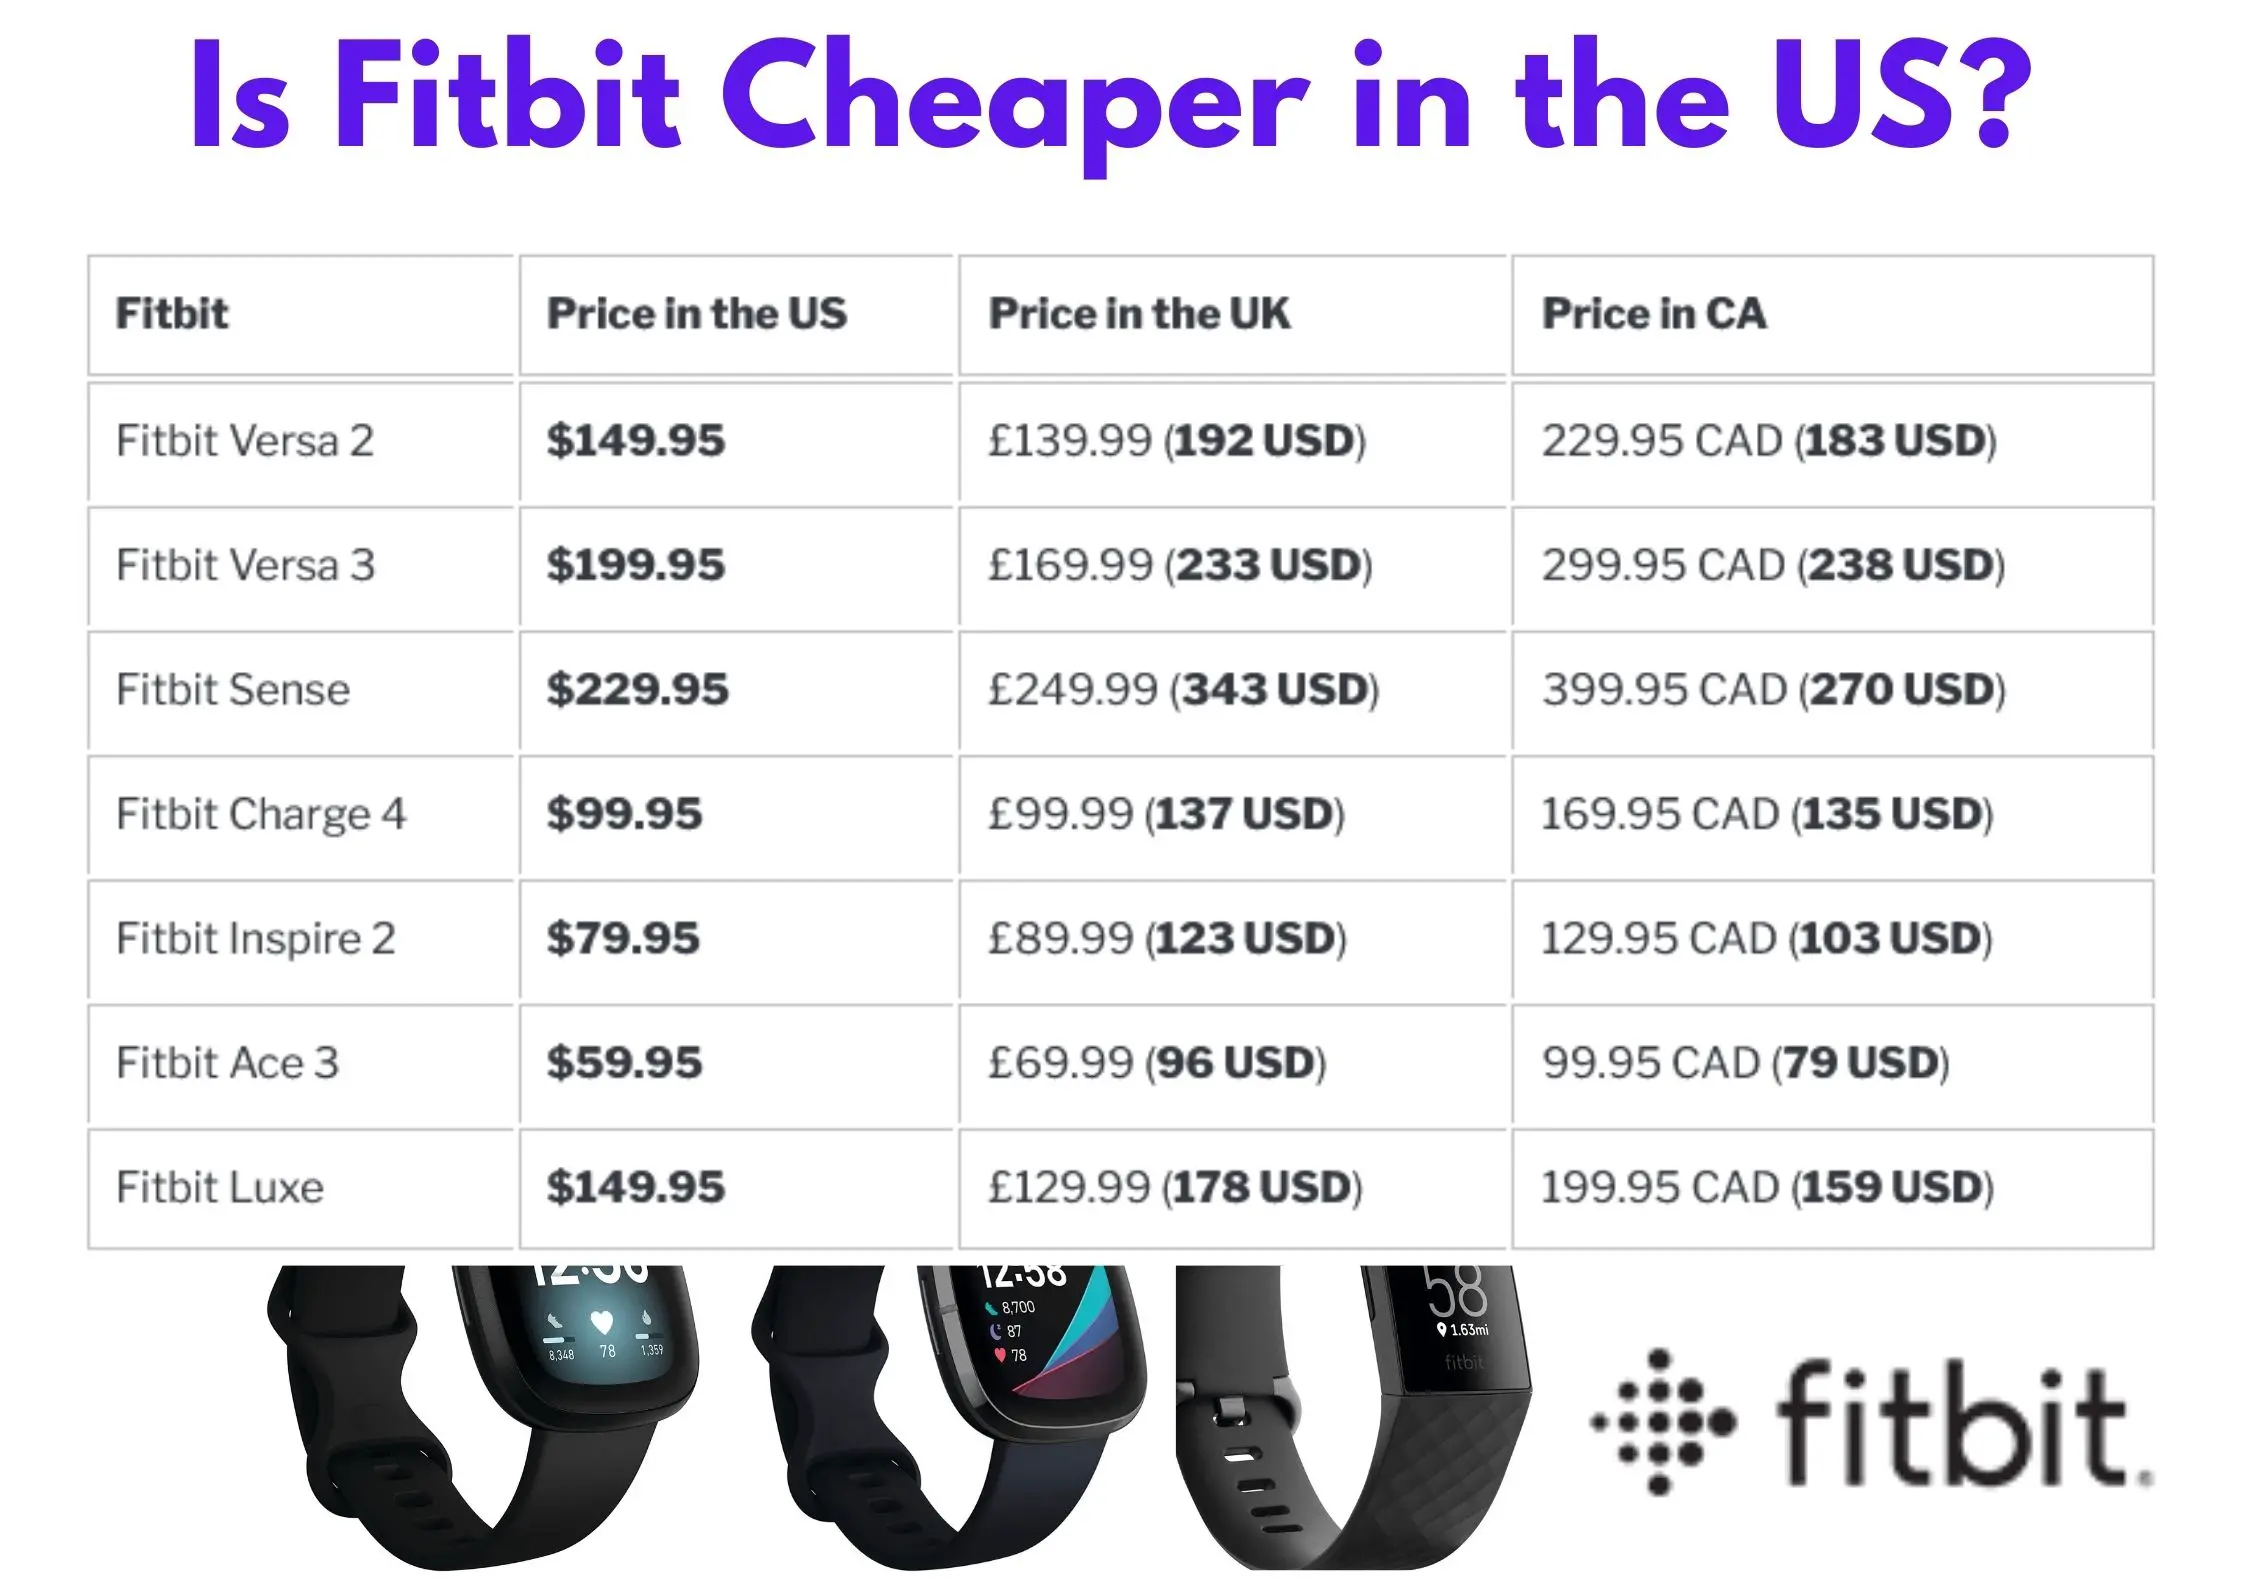 Is Fitbit Cheaper in the US?